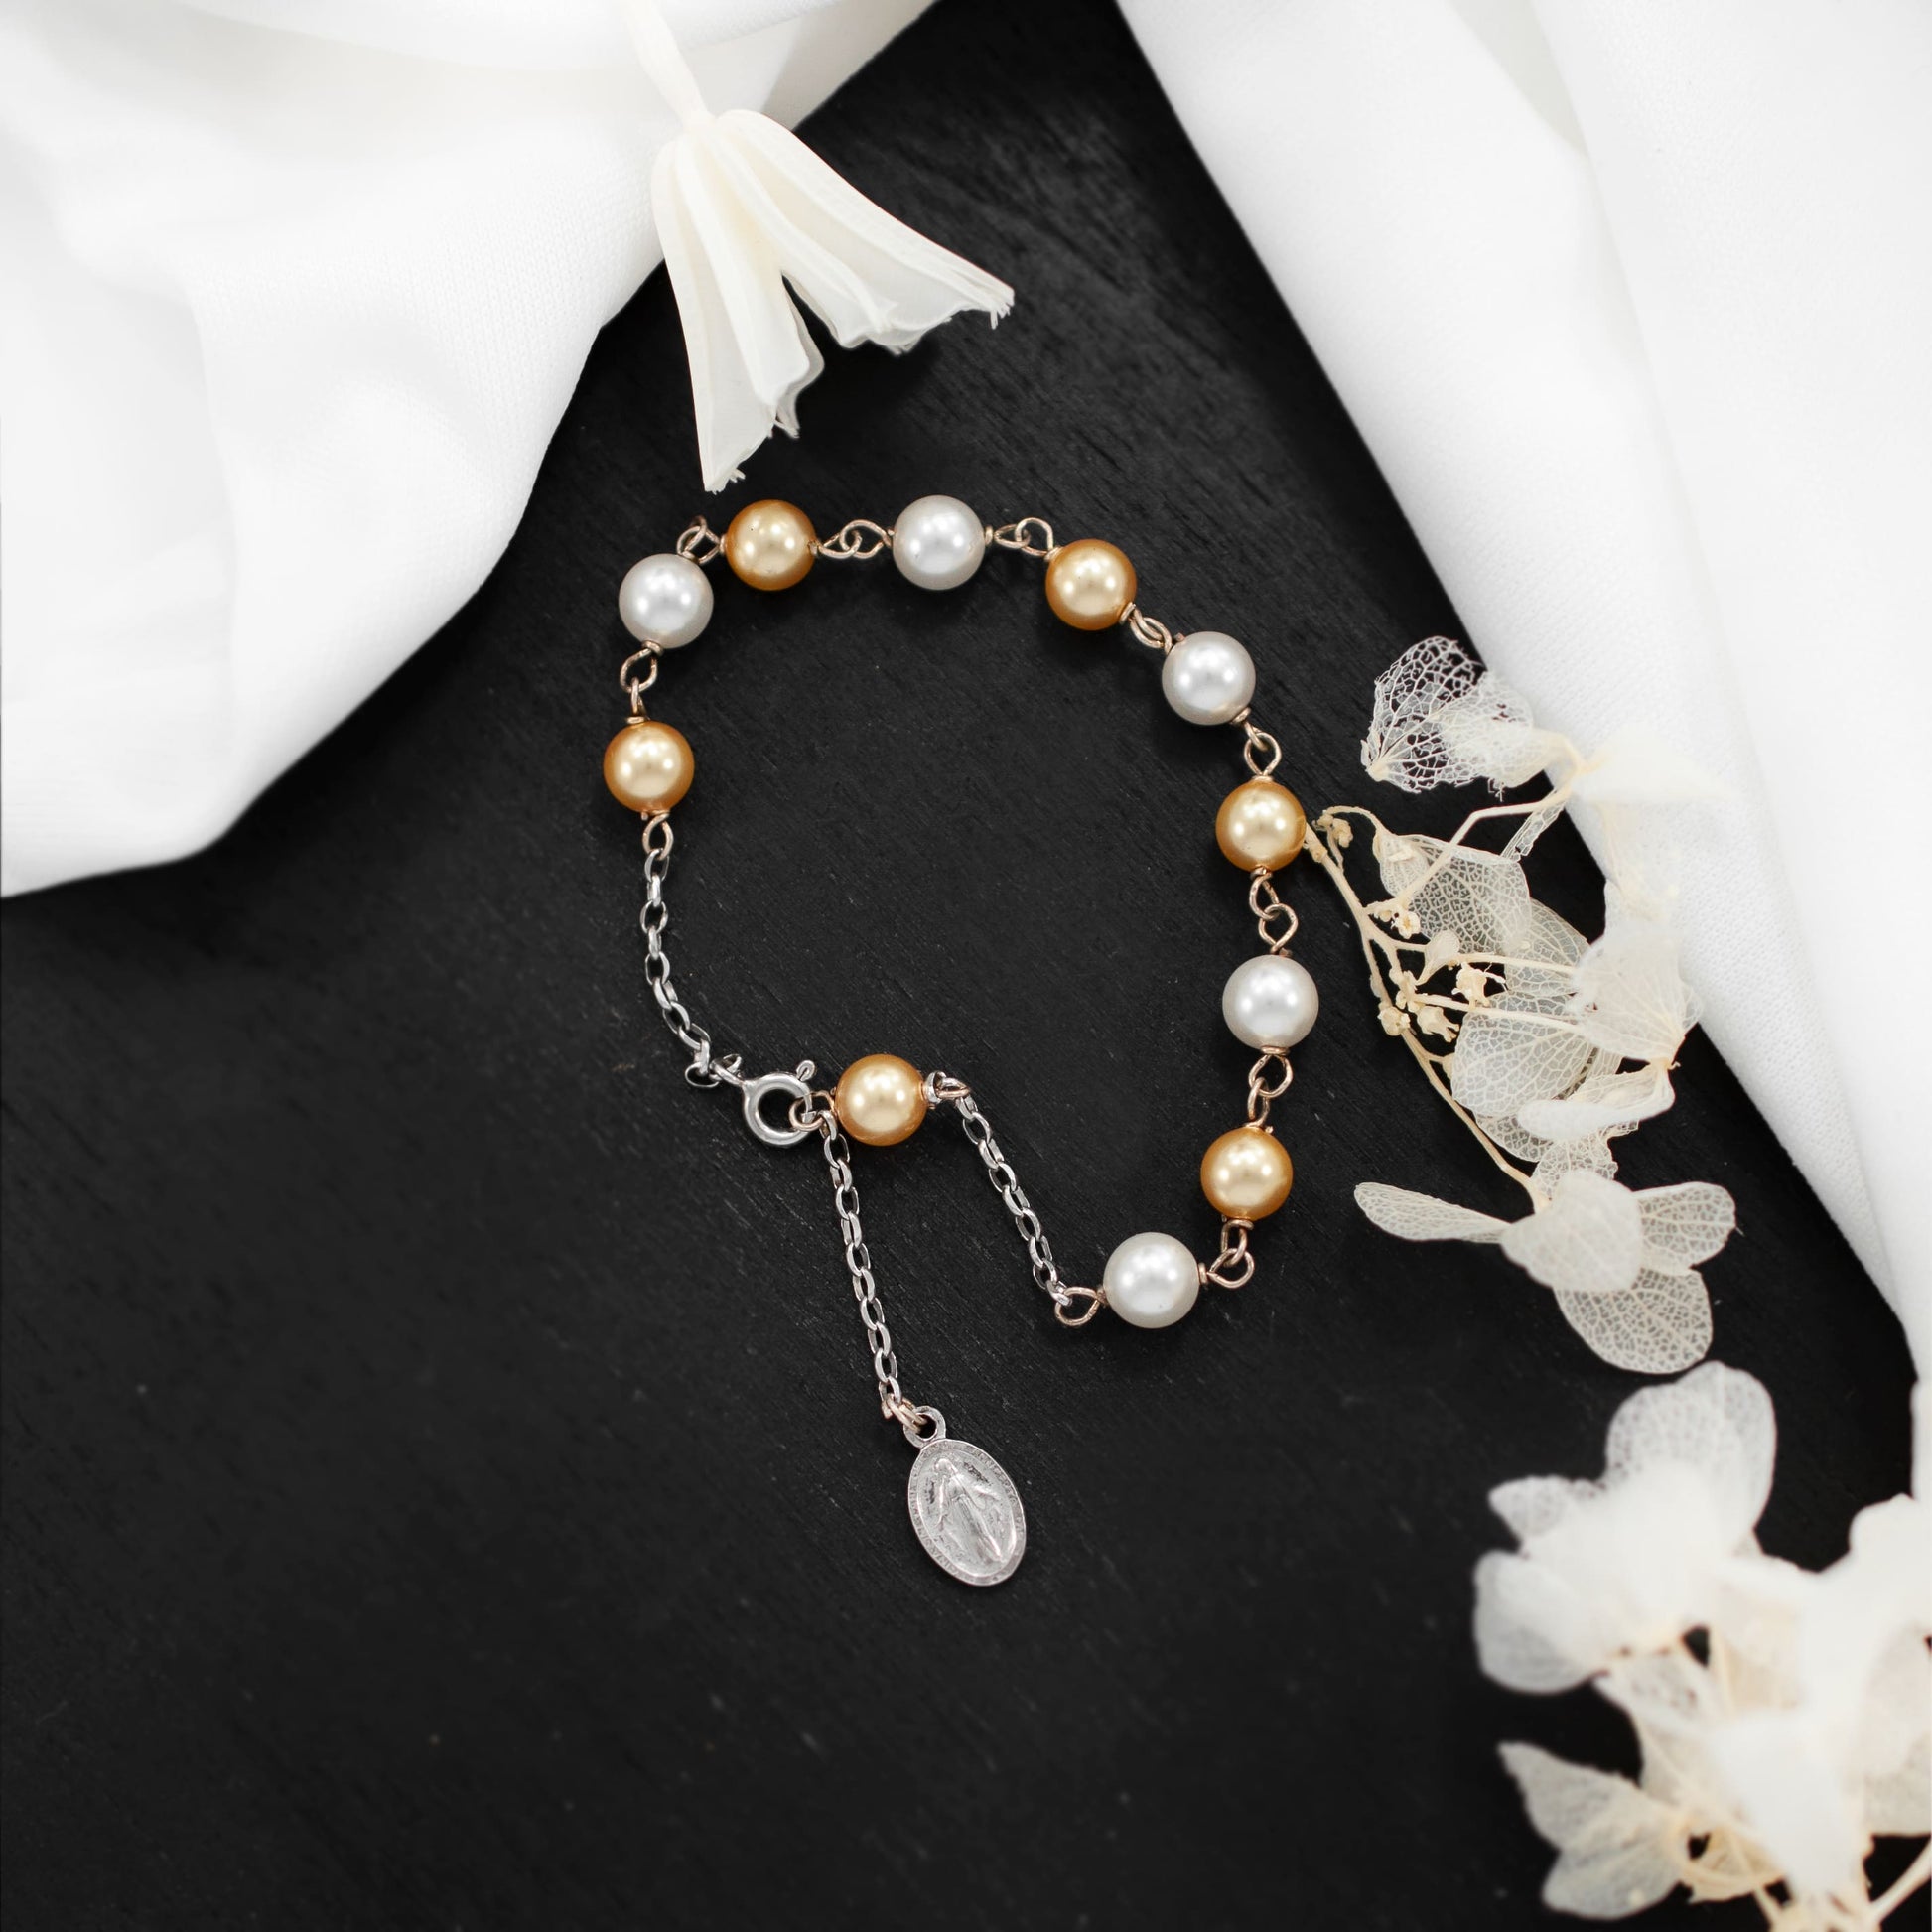 MONDO CATTOLICO Prayer Beads Adjustable Sterling Silver Rosary Bracelet Swarovski Crystal Pearls White and Gold Beads